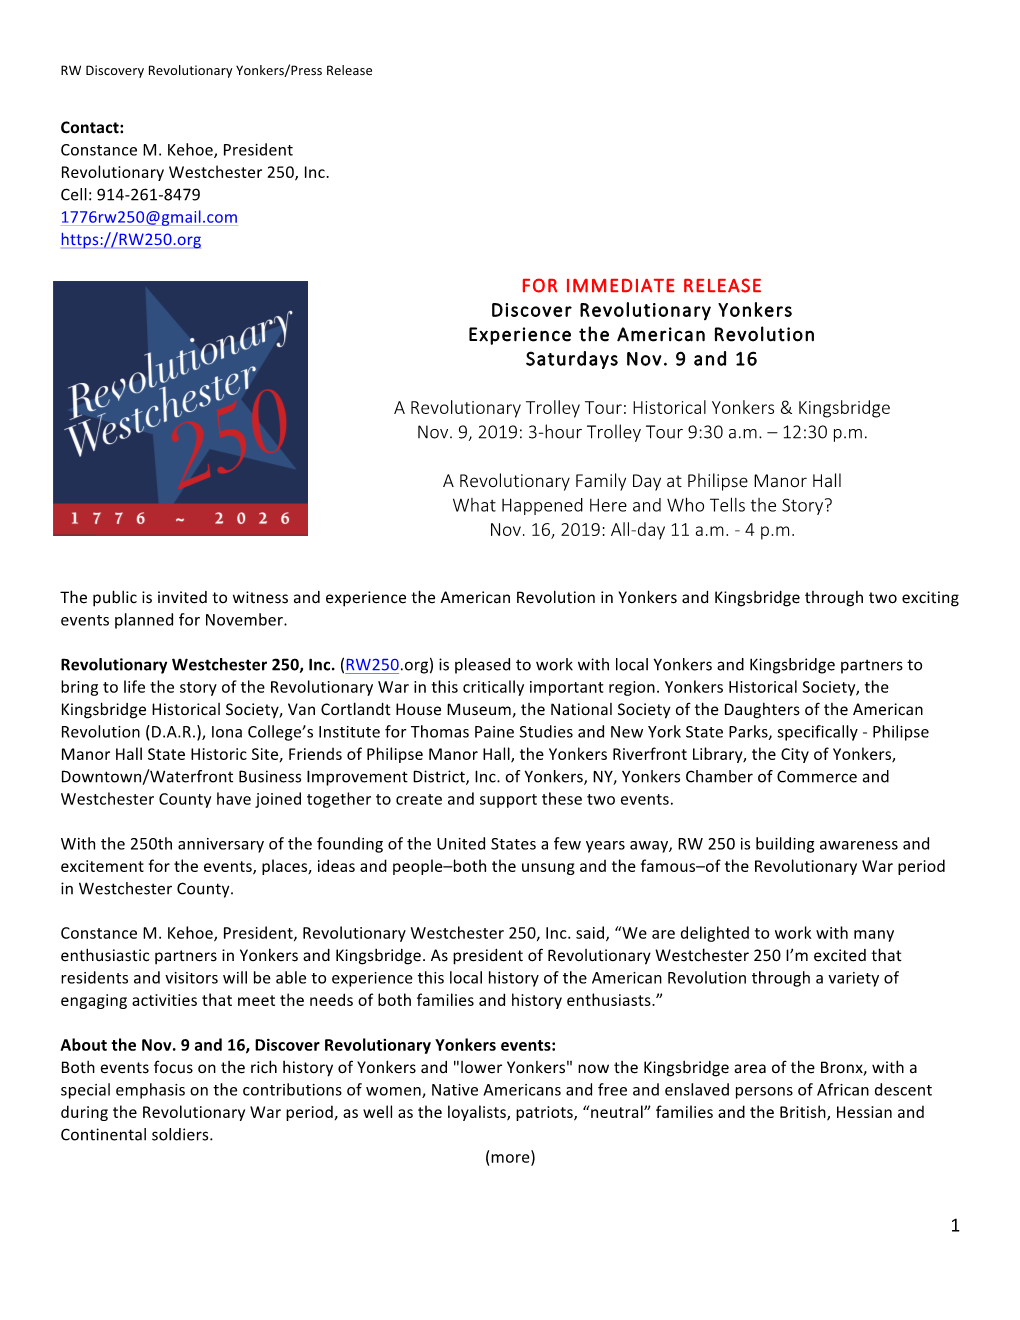 1 for IMMEDIATE RELEASE Discover Revolutionary Yonkers